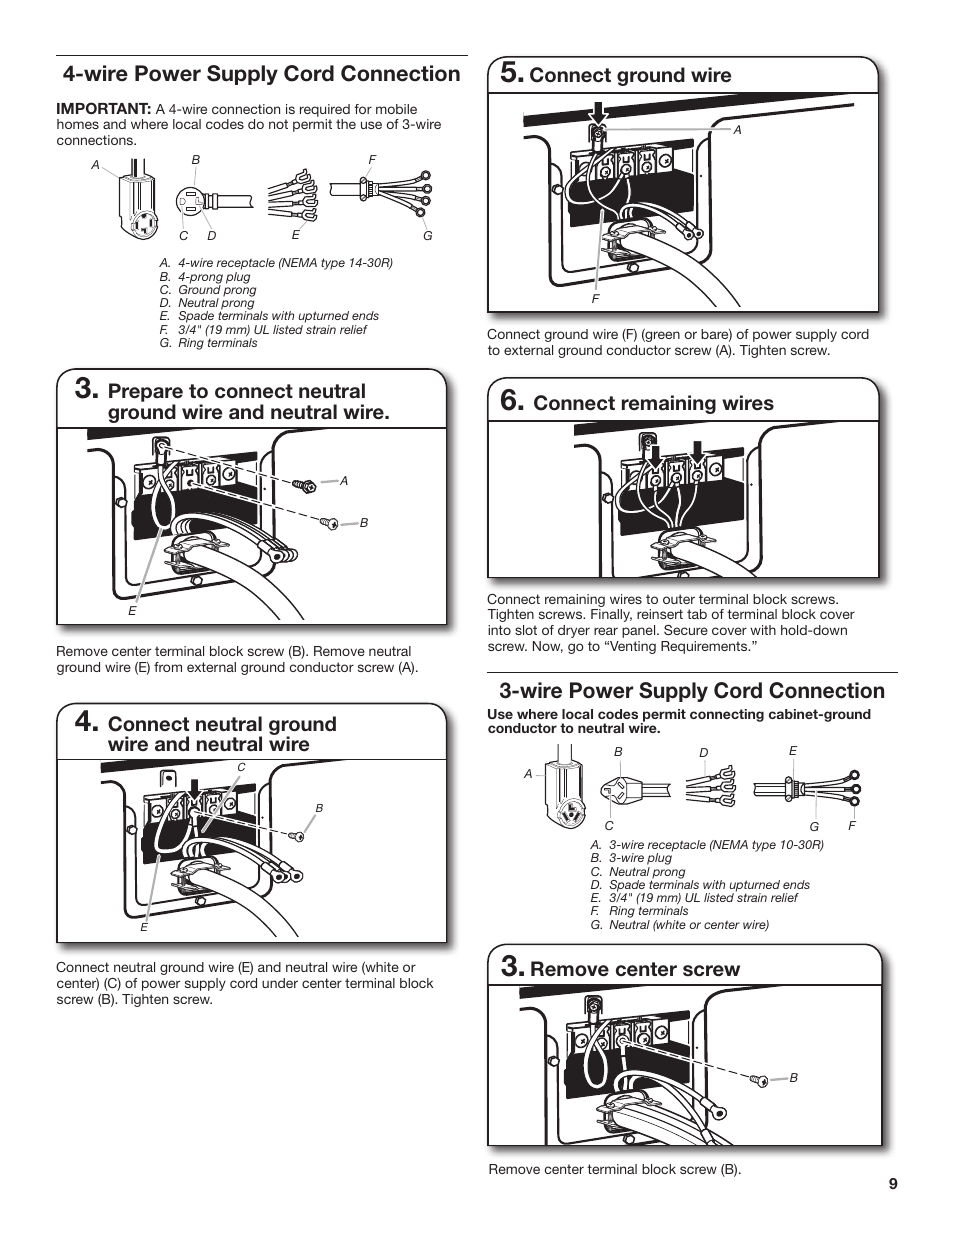 Wire power supply cord connection, Connect remaining wires, Connect ground wire | Remove center screw, Connect neutral ground wire and neutral wire | Maytag WED4890BQ Installation User Manual | Page 9 / 20